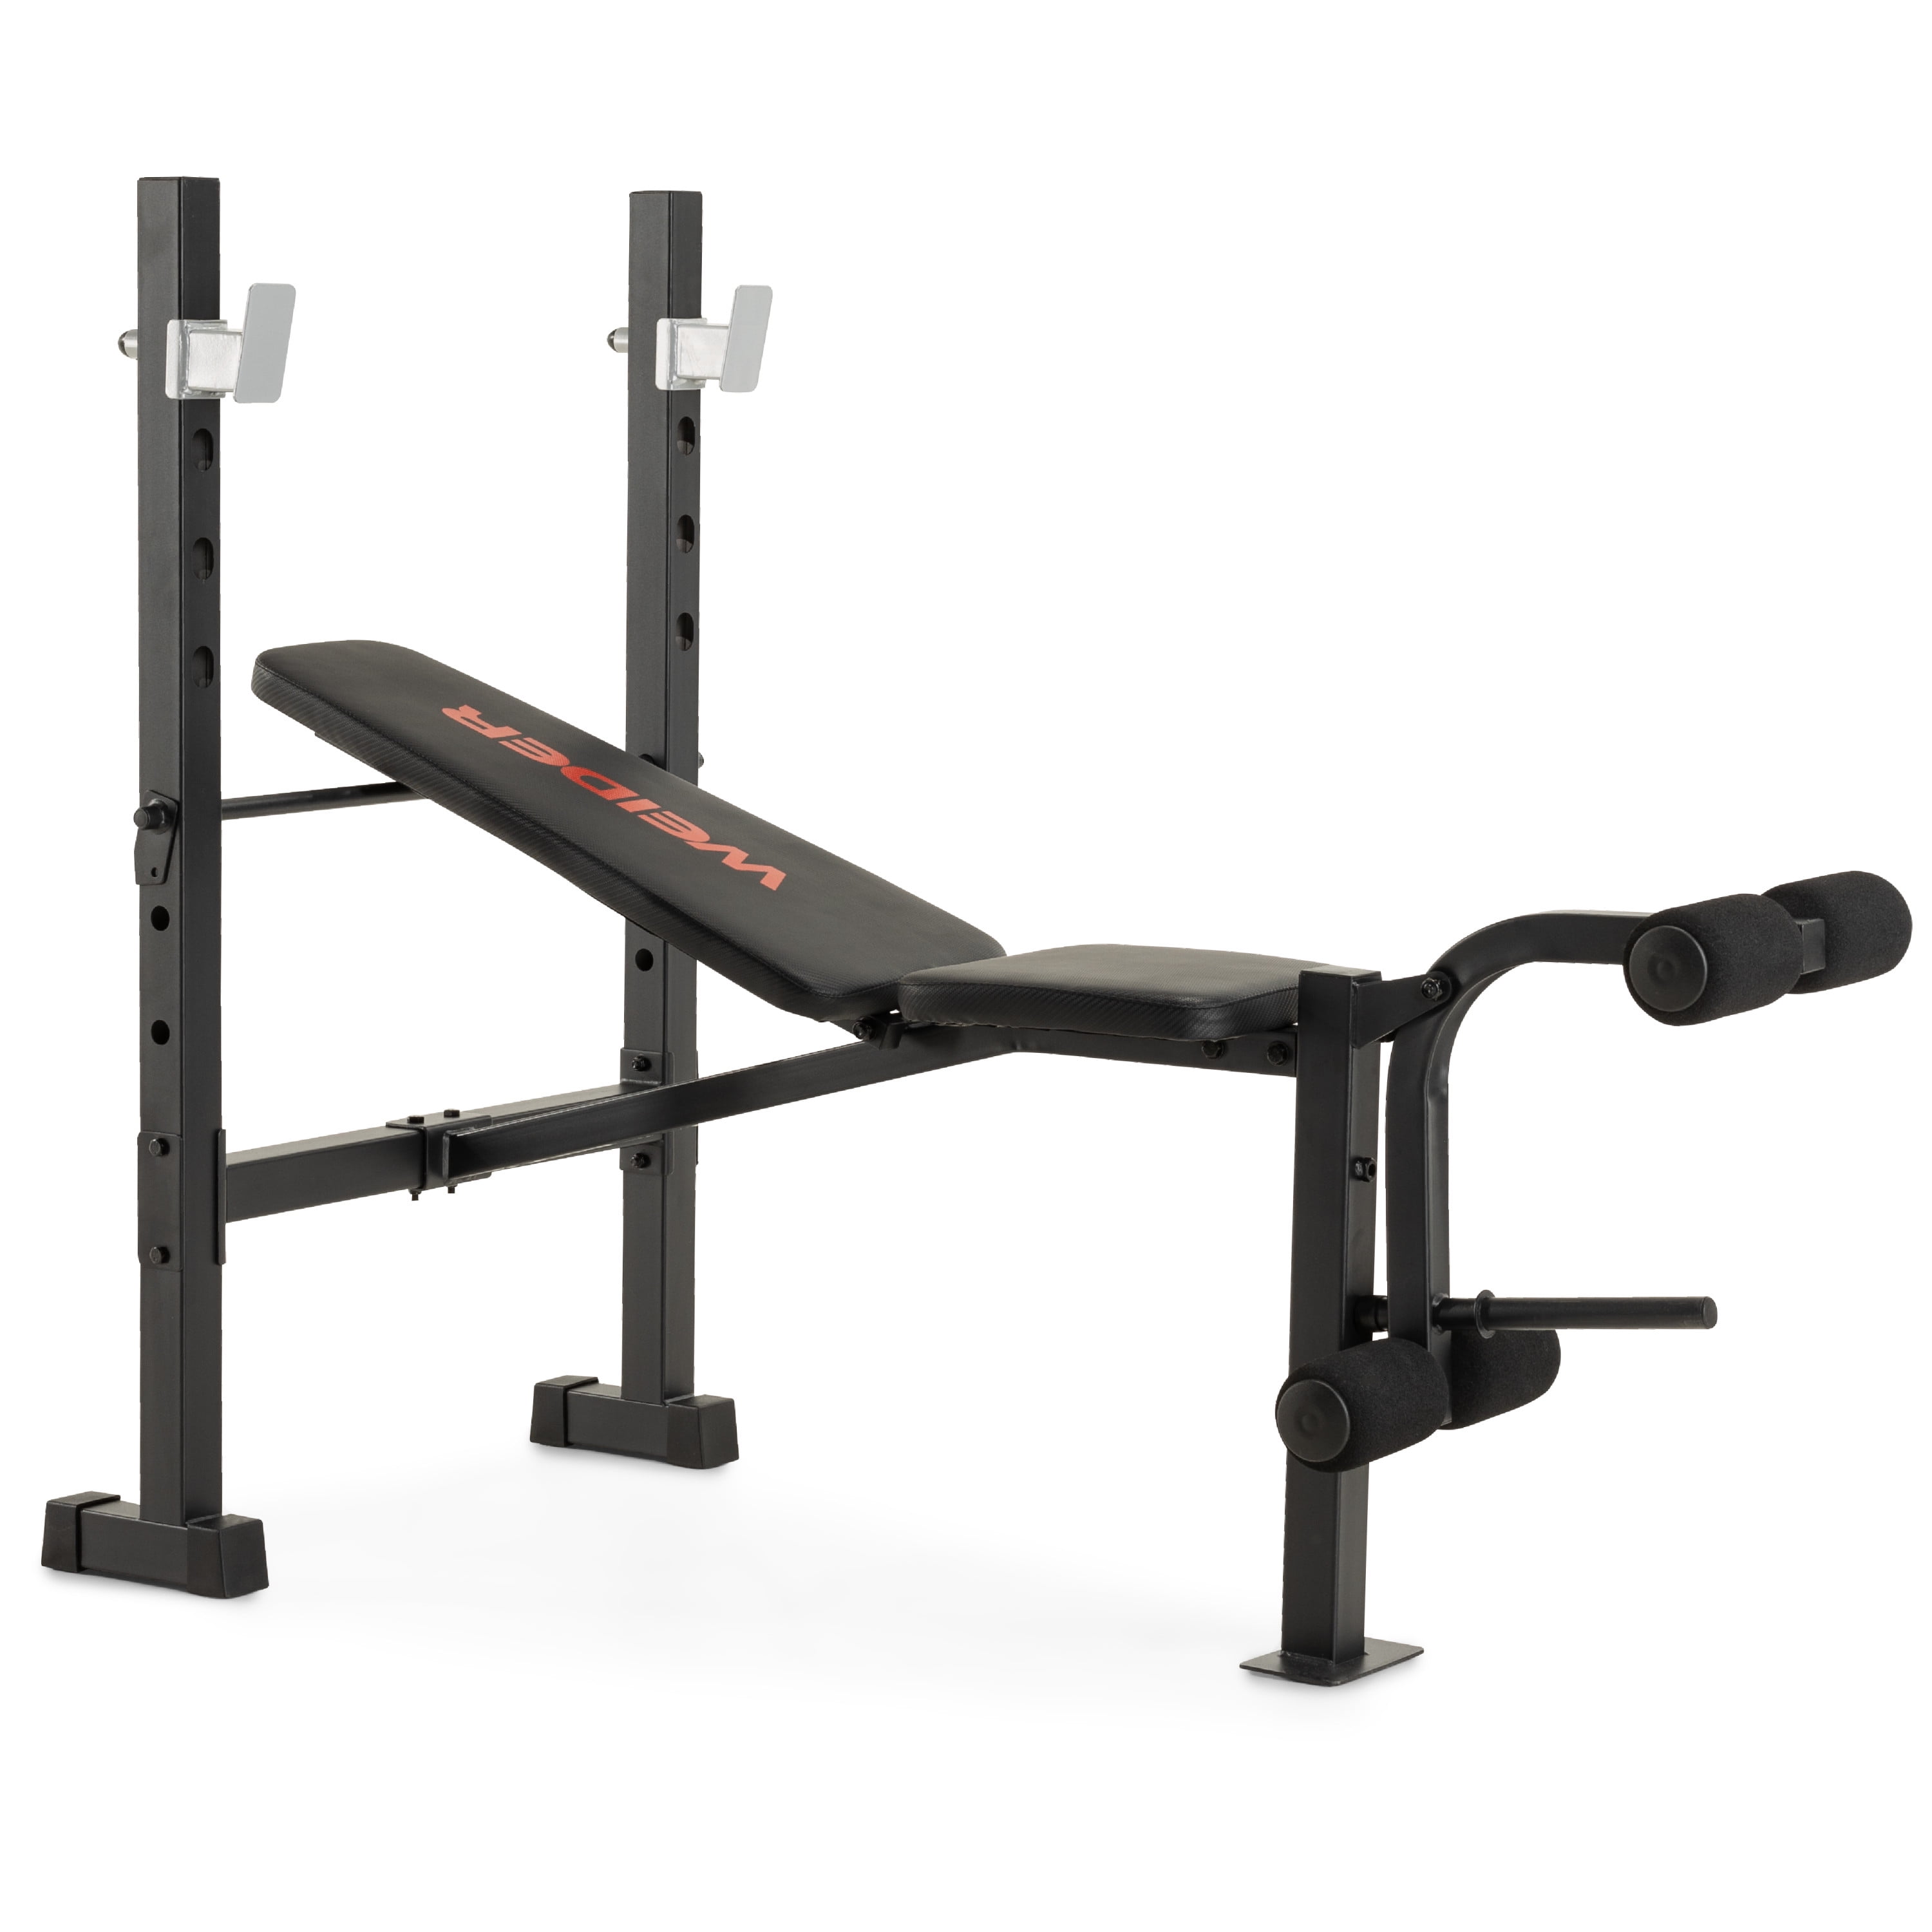 Weider Legacy Standard Bench and Rack, 410 Lb. Total Weight Capacity